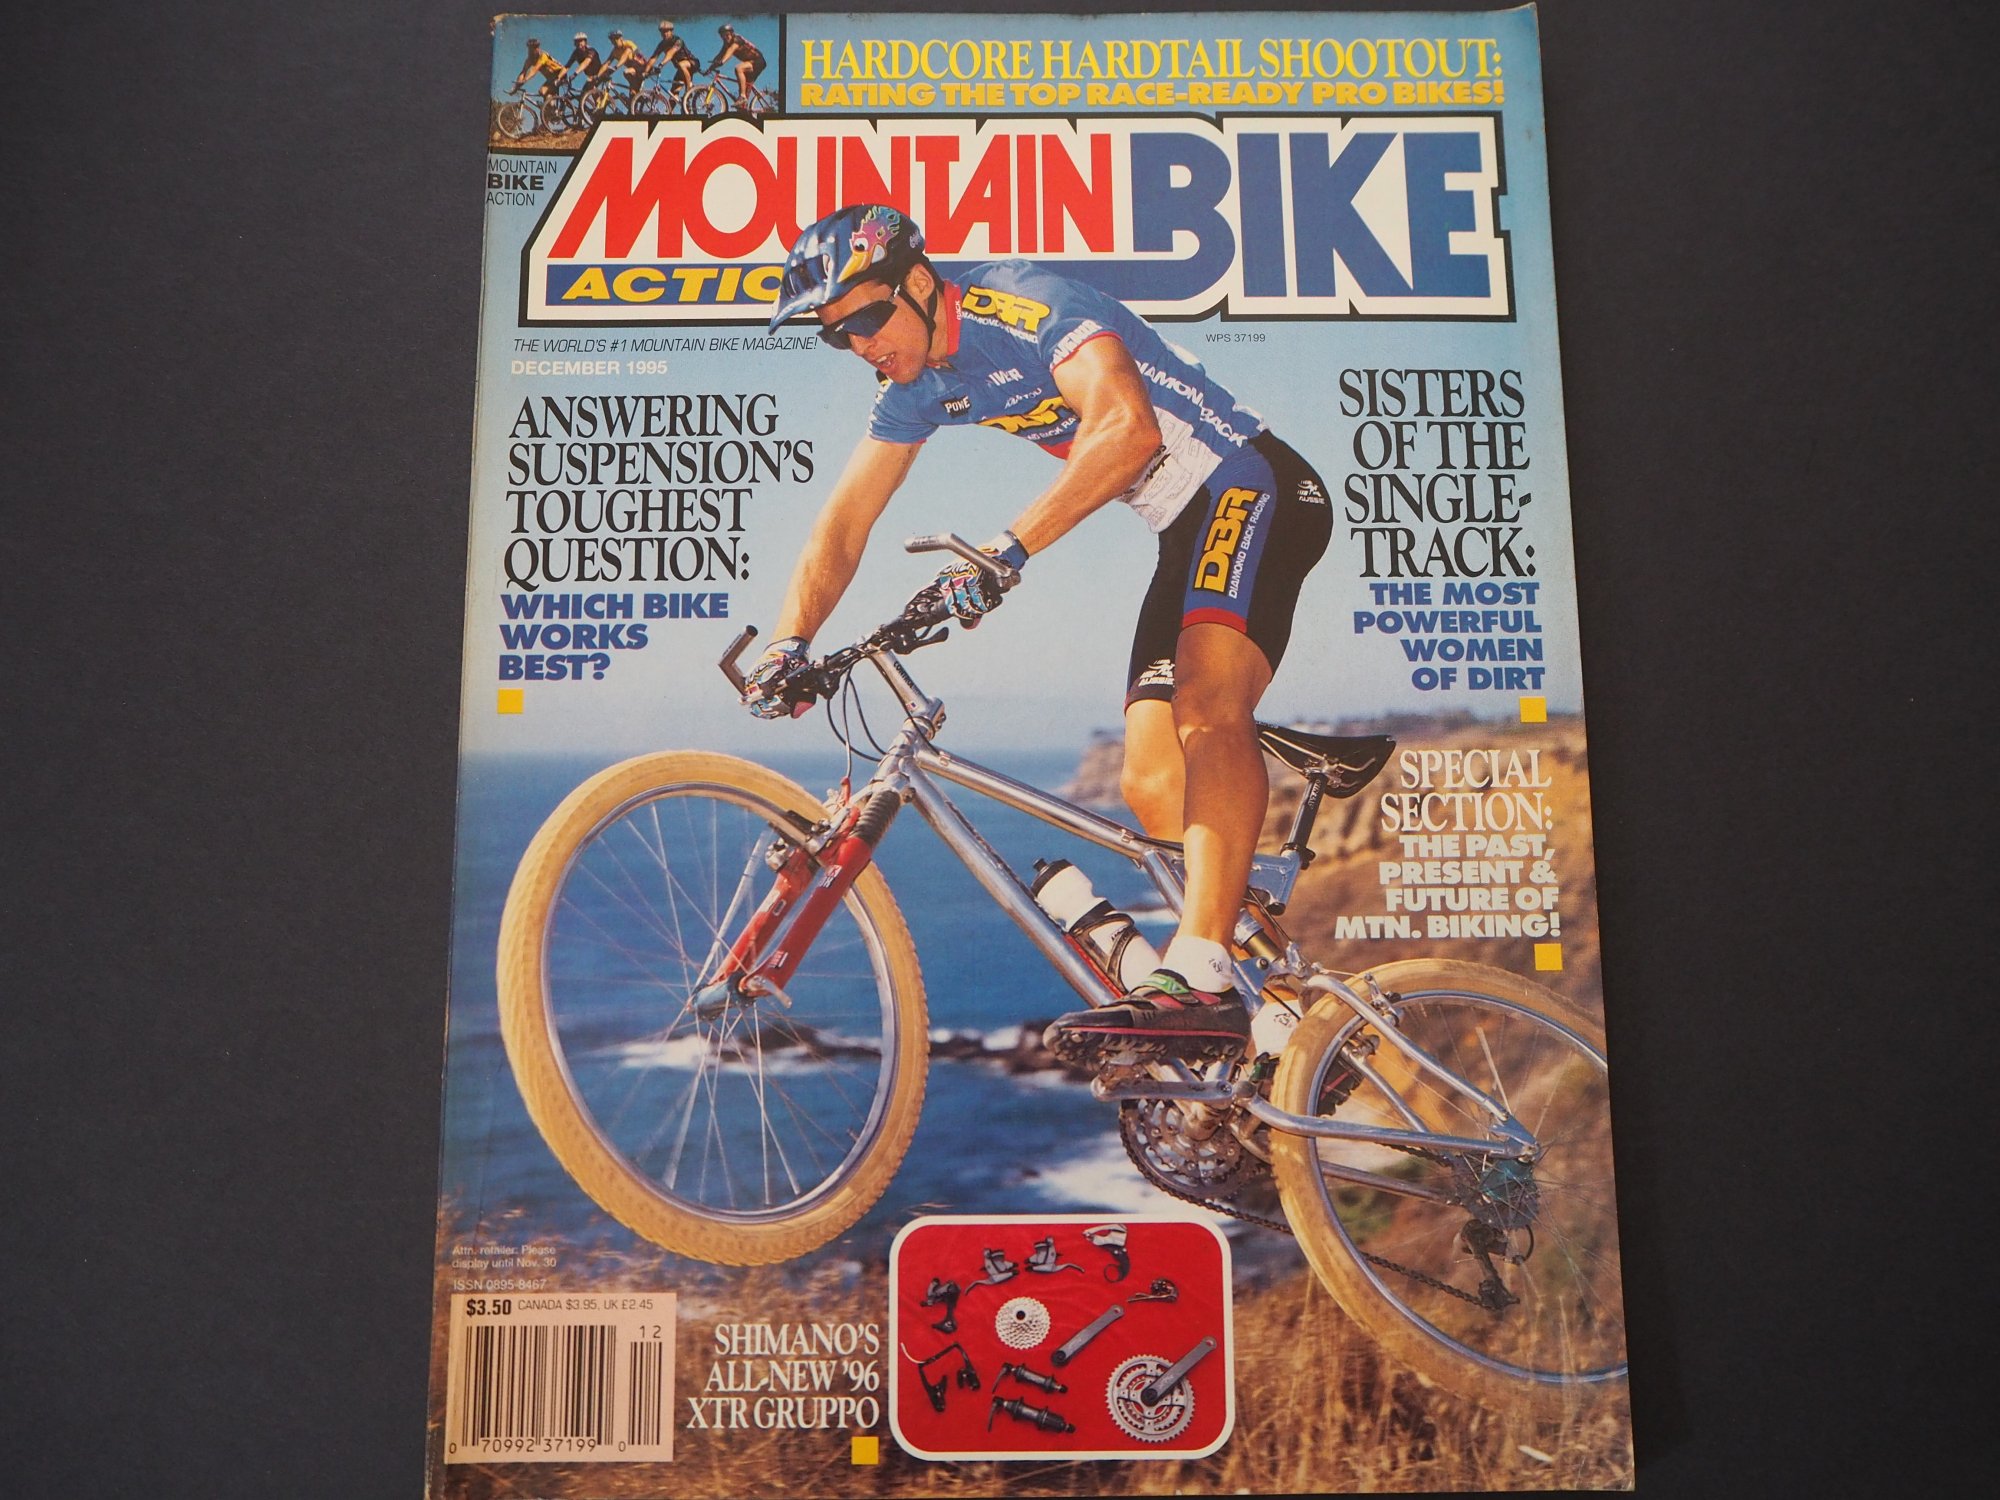 <img class='new_mark_img1' src='https://img.shop-pro.jp/img/new/icons1.gif' style='border:none;display:inline;margin:0px;padding:0px;width:auto;' />MOUNTAIN BIKE ACTION 1995(DECEMBER)